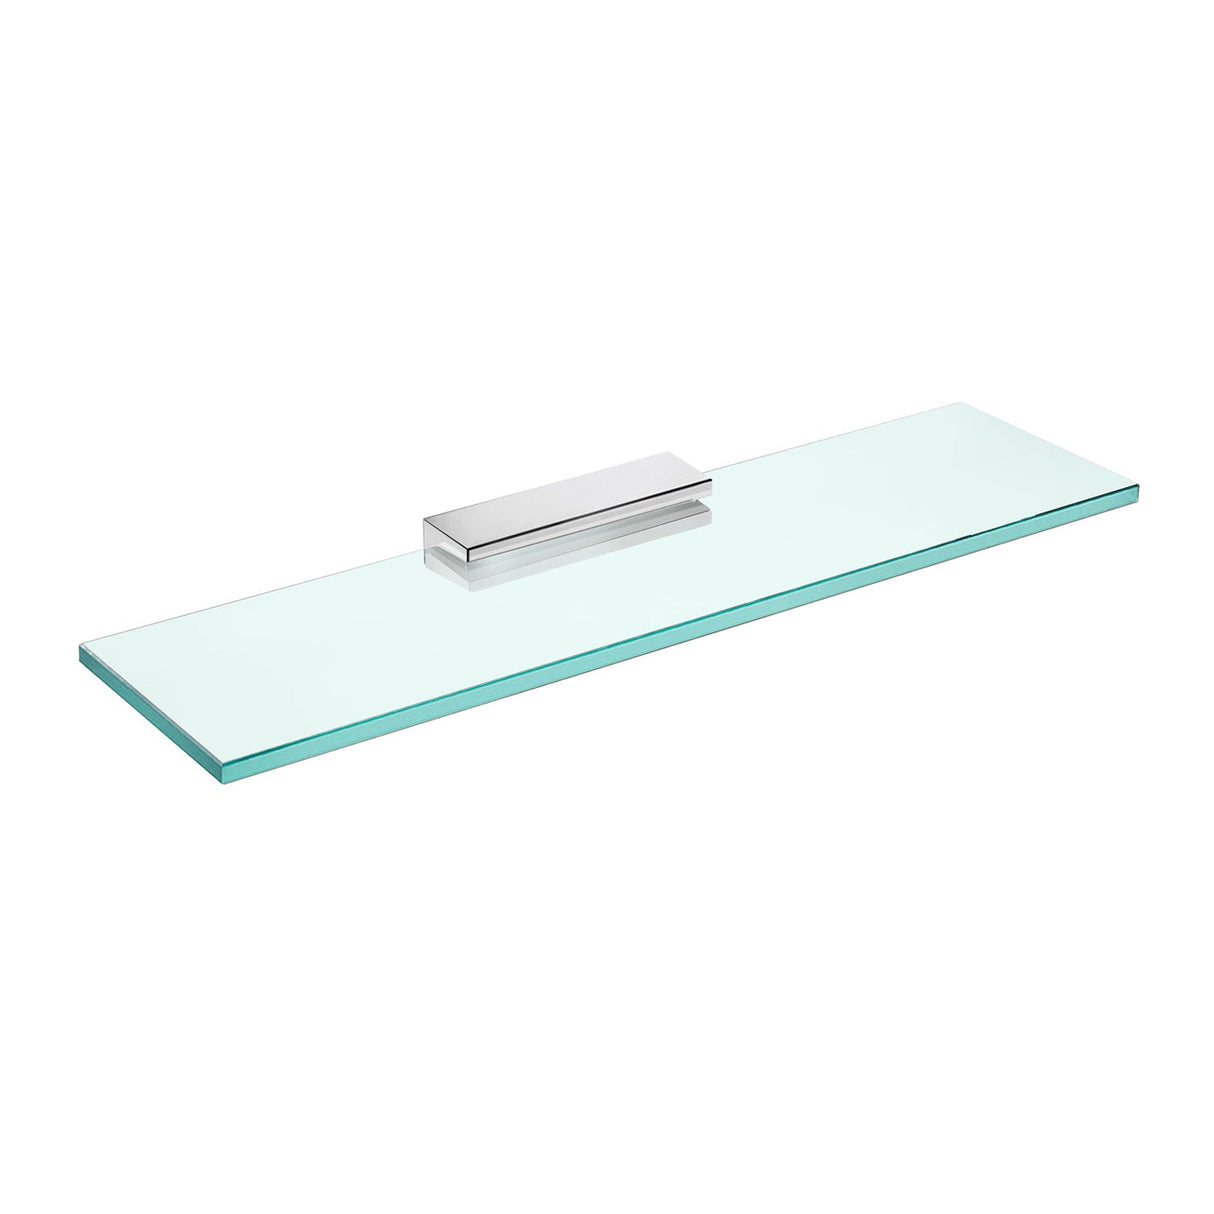 DAX Venice Brass and Glass Bathroom Shelf with Wall Mount, Brushed Stainless Steel DAX-GDC060144-BN